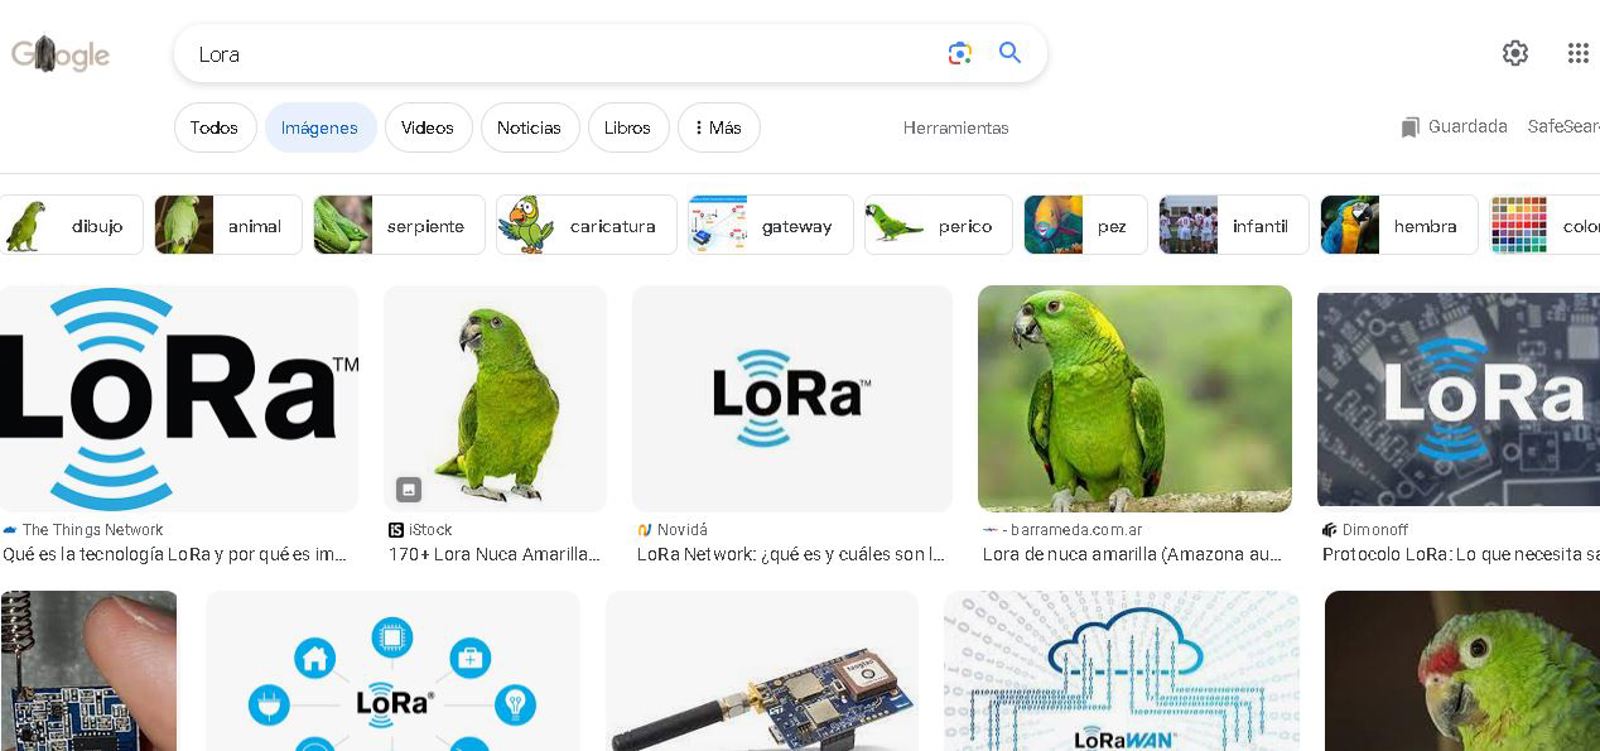 Make a Lora following the images